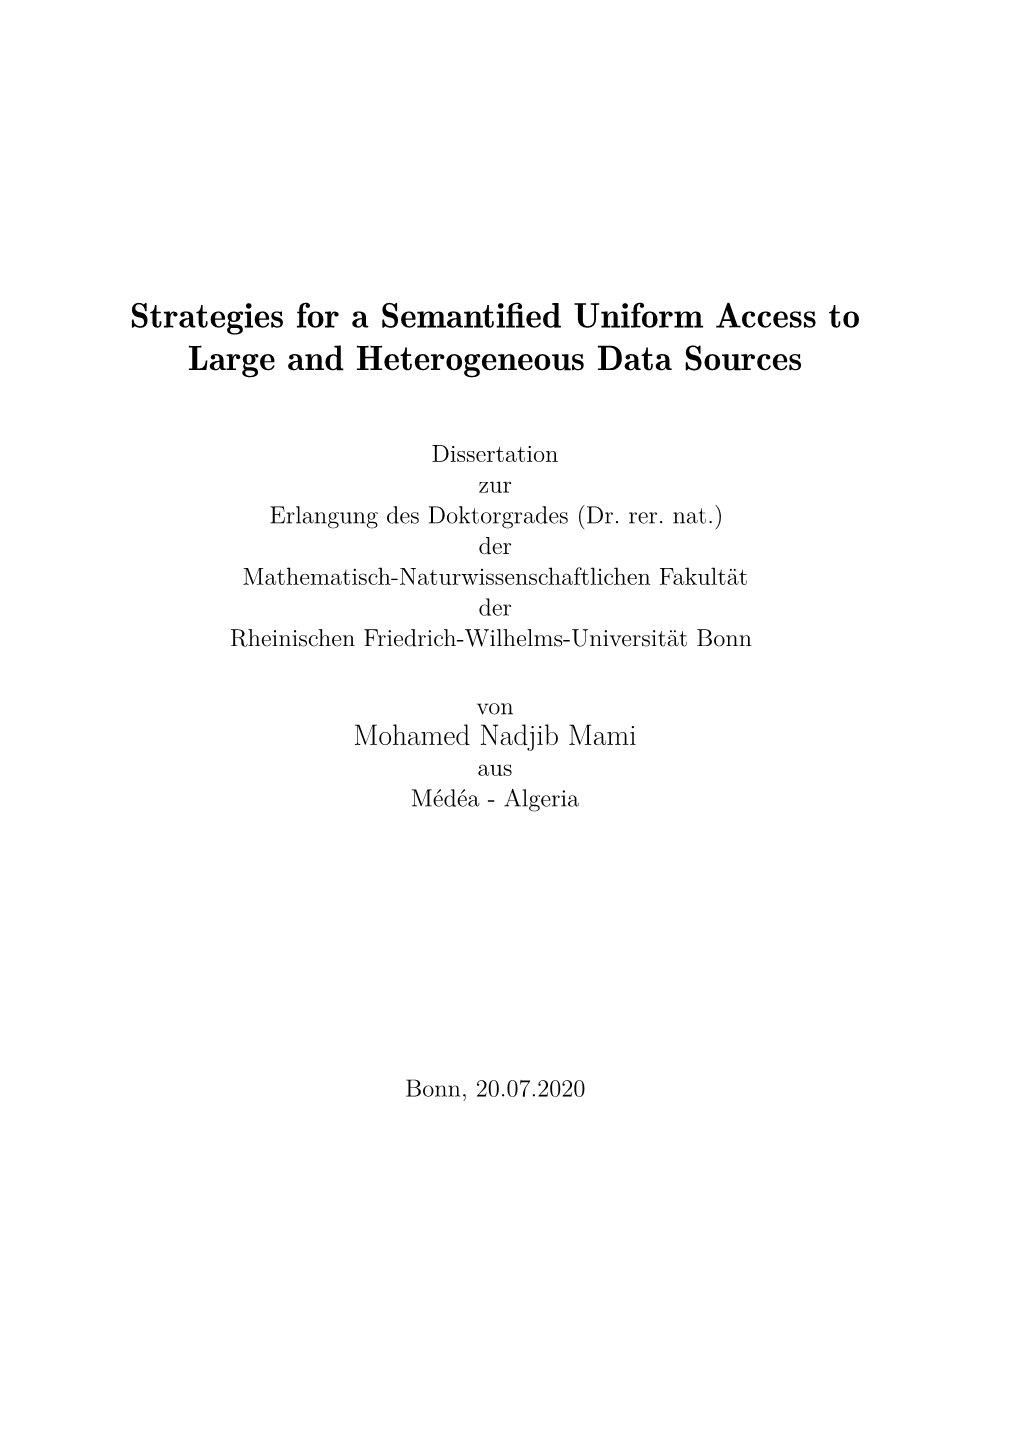 Strategies for a Semantified Uniform Access to Large And